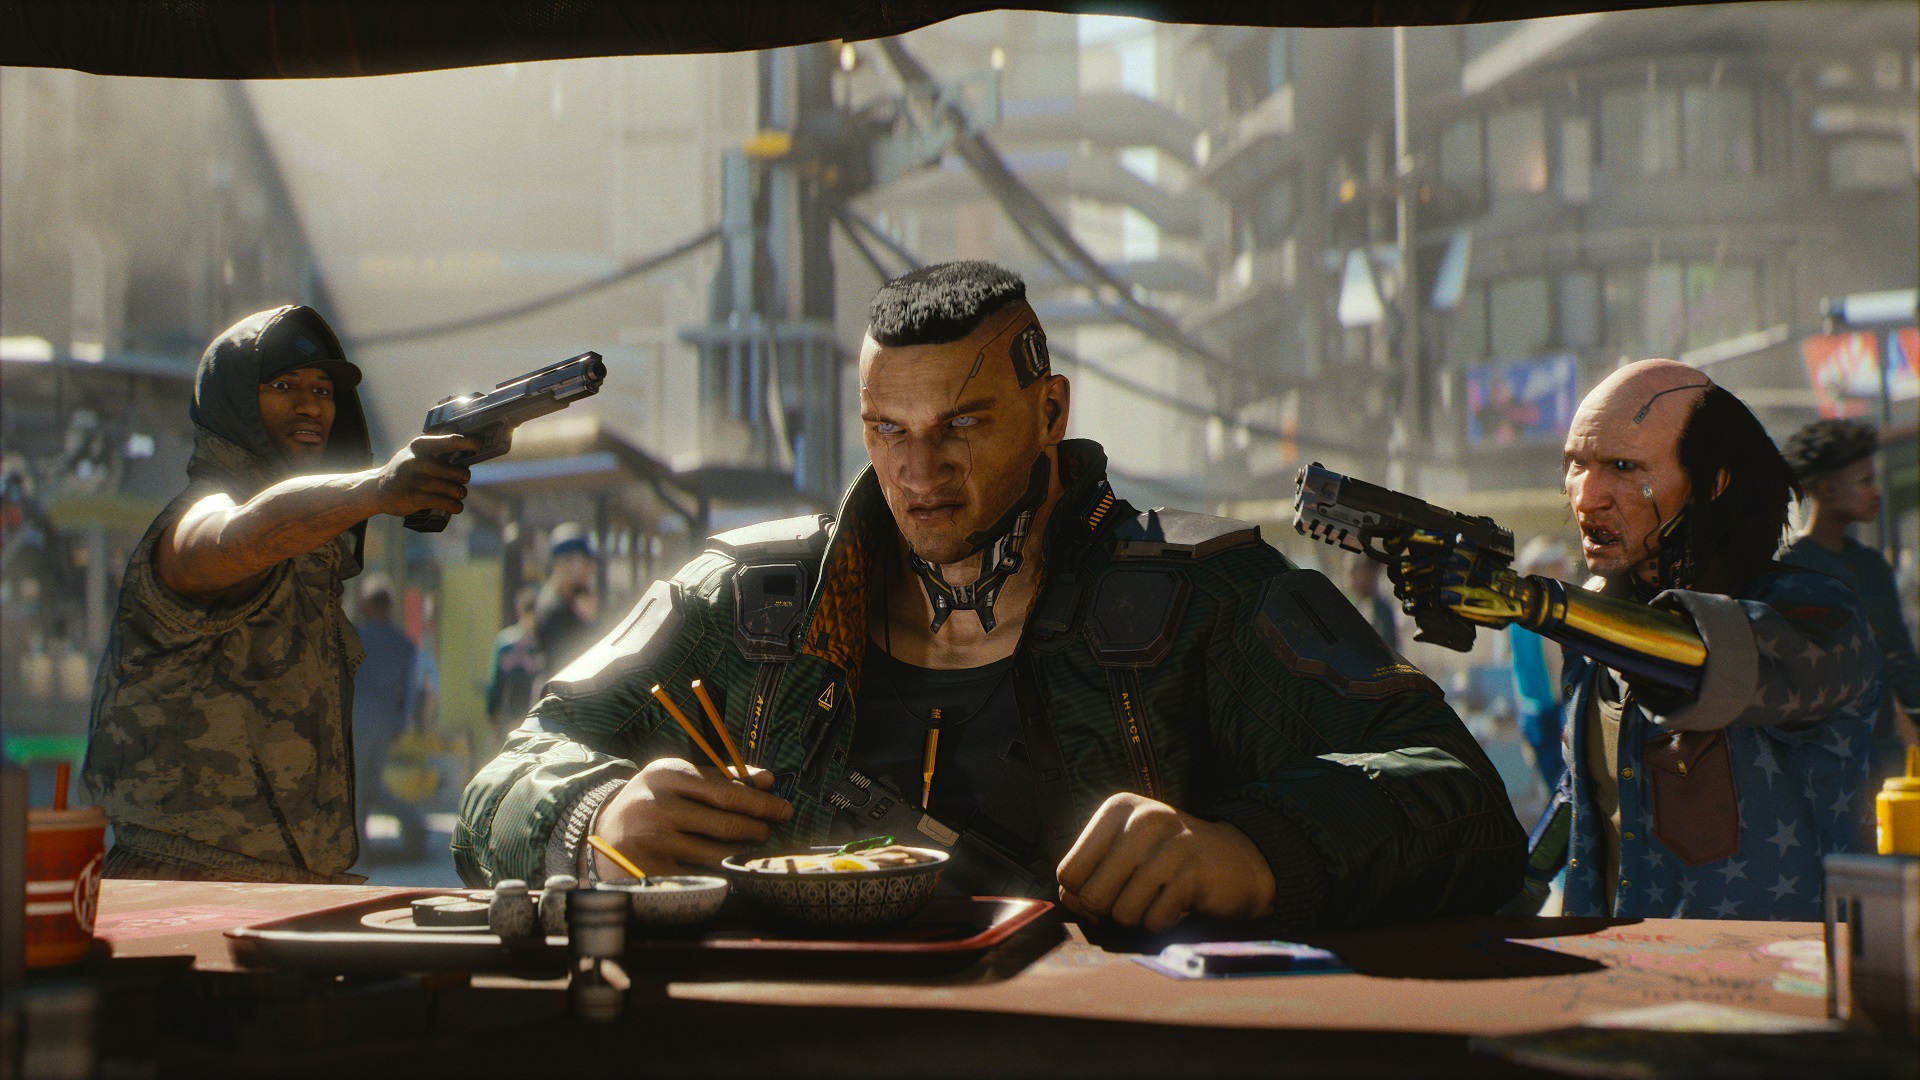 Cyberpunk 2077 dev to stay independent, no interest in being acquired